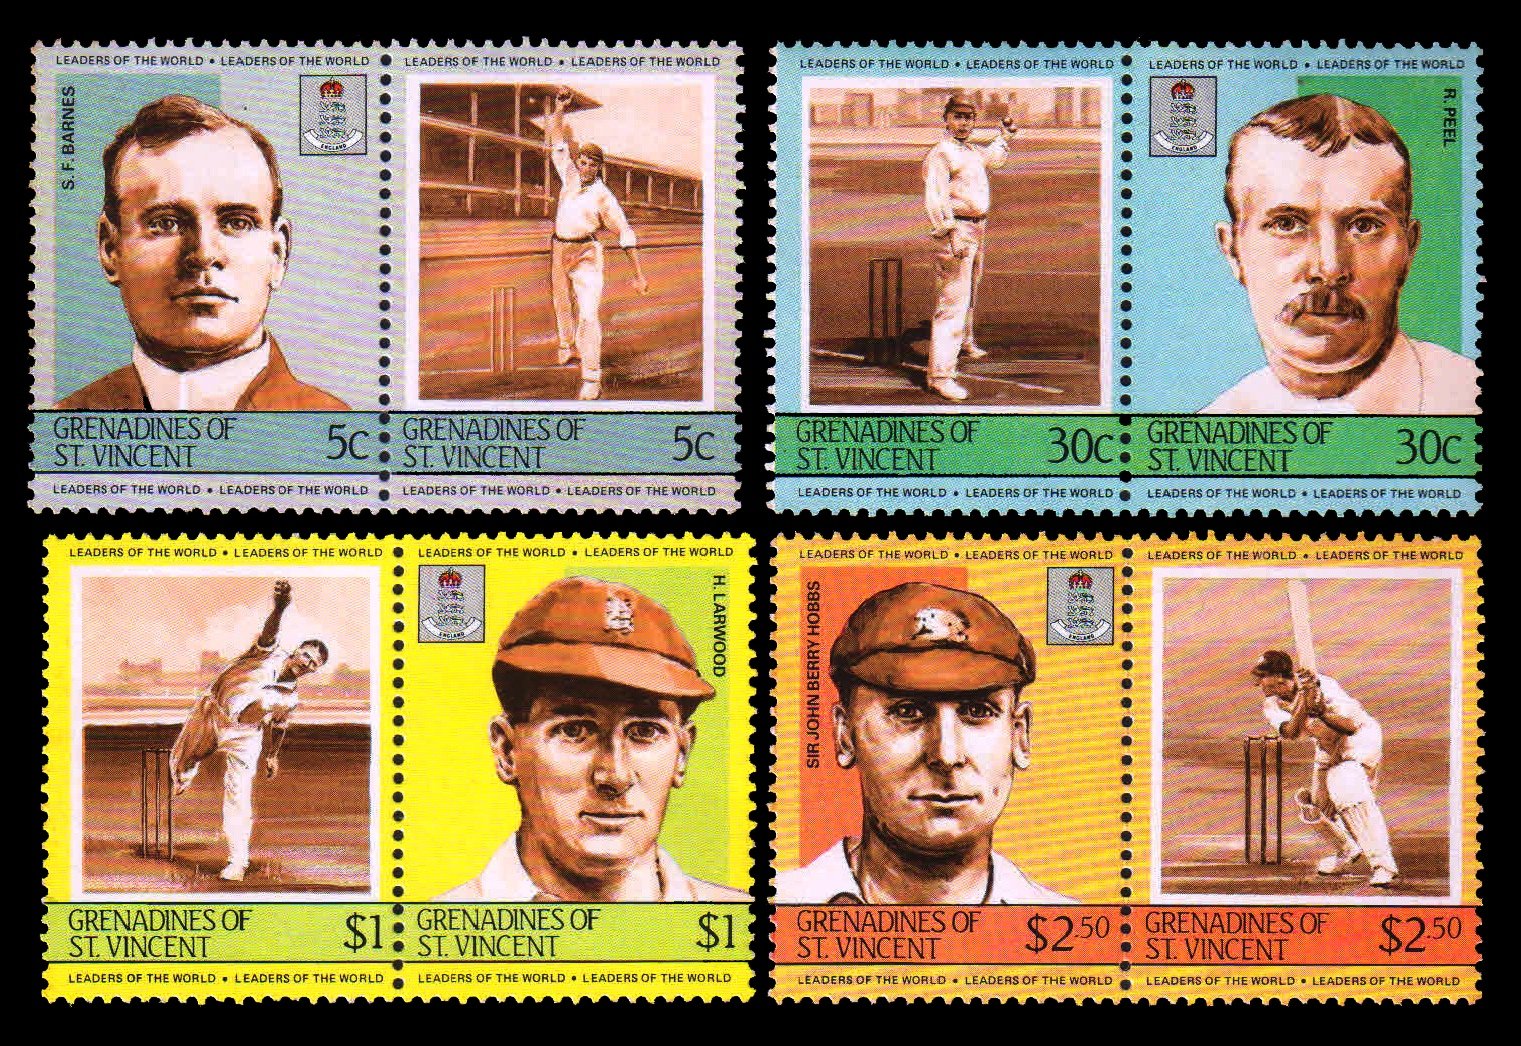 GRENADINES OF ST. VINCENT 1984 - World Cricketers. Set of 8 Stamps (4 Pairs). MNH. S.G. 331-338